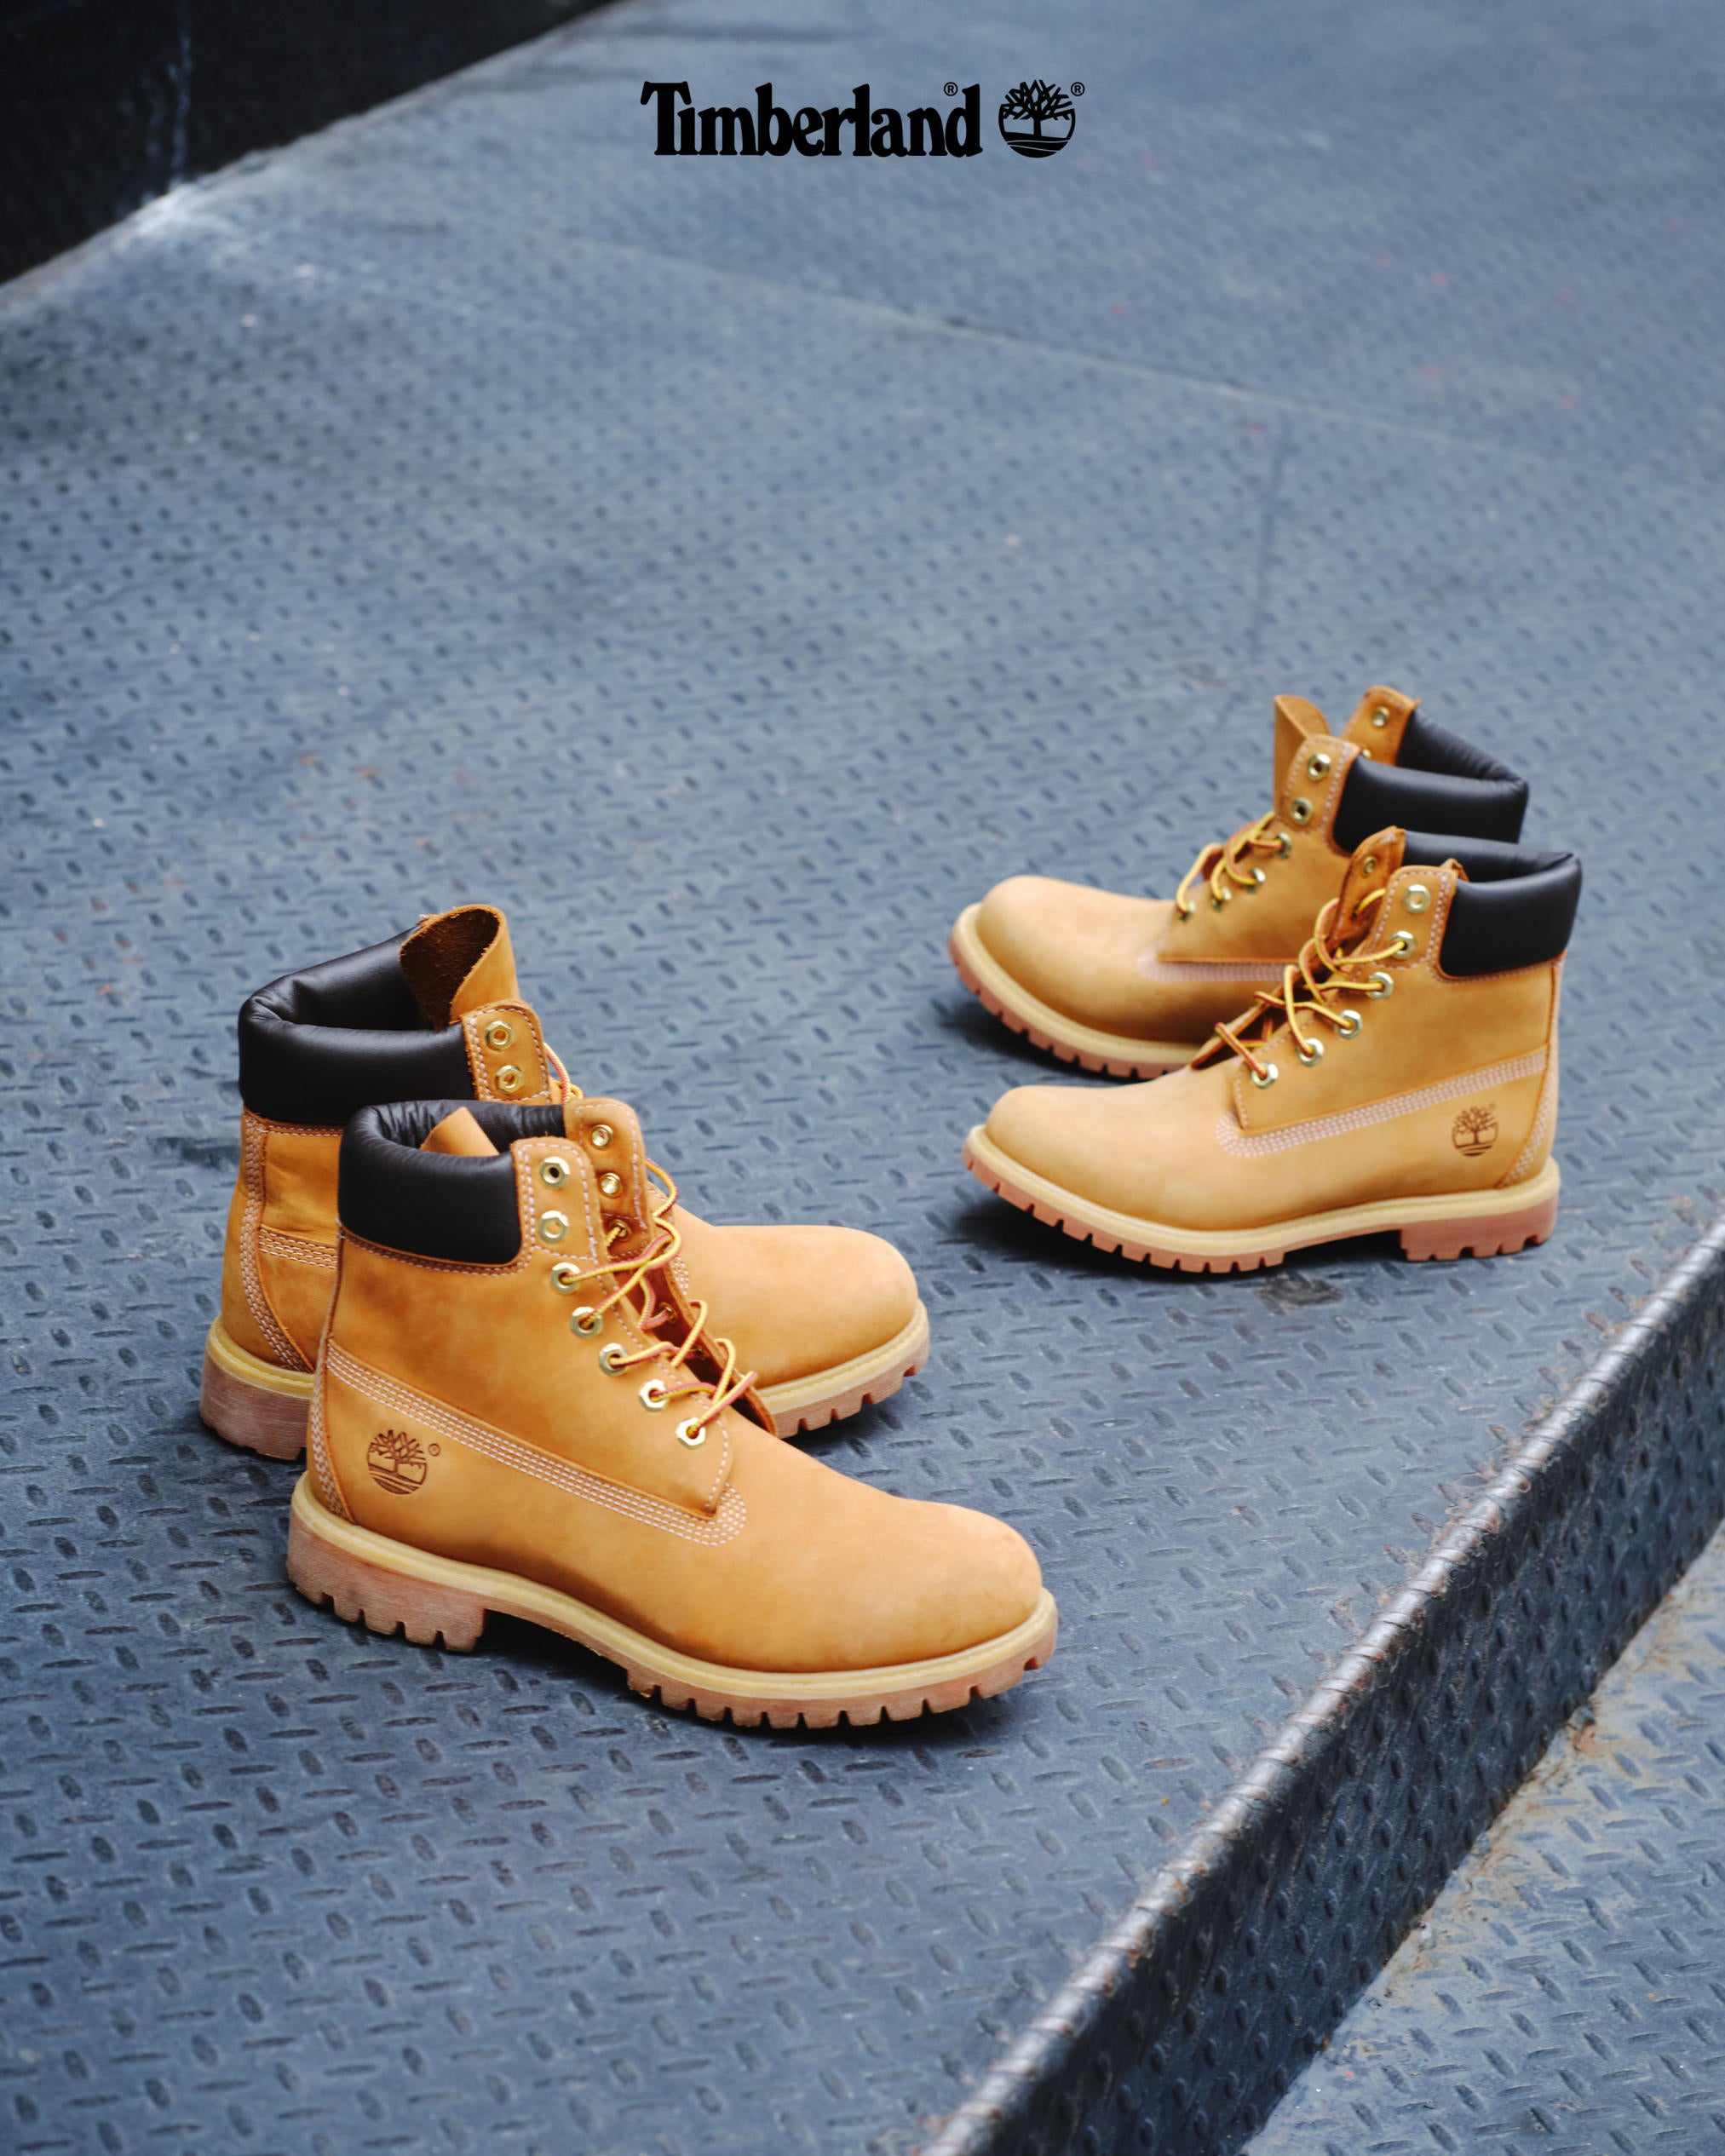 The Timberland Boot: An Icon Across the Eras